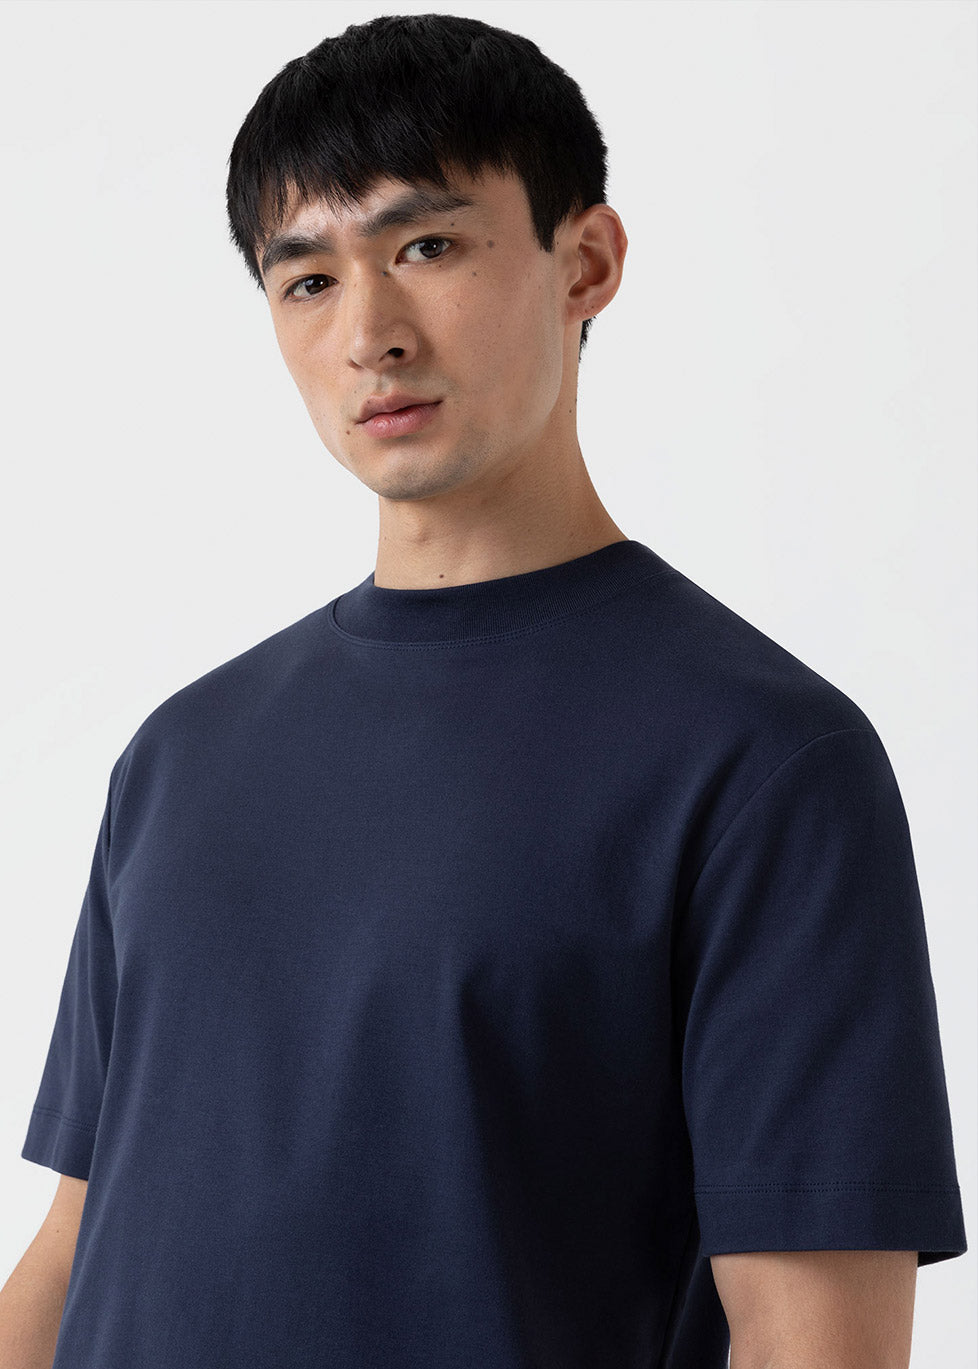 What makes the Mock Neck T-shirt stand out